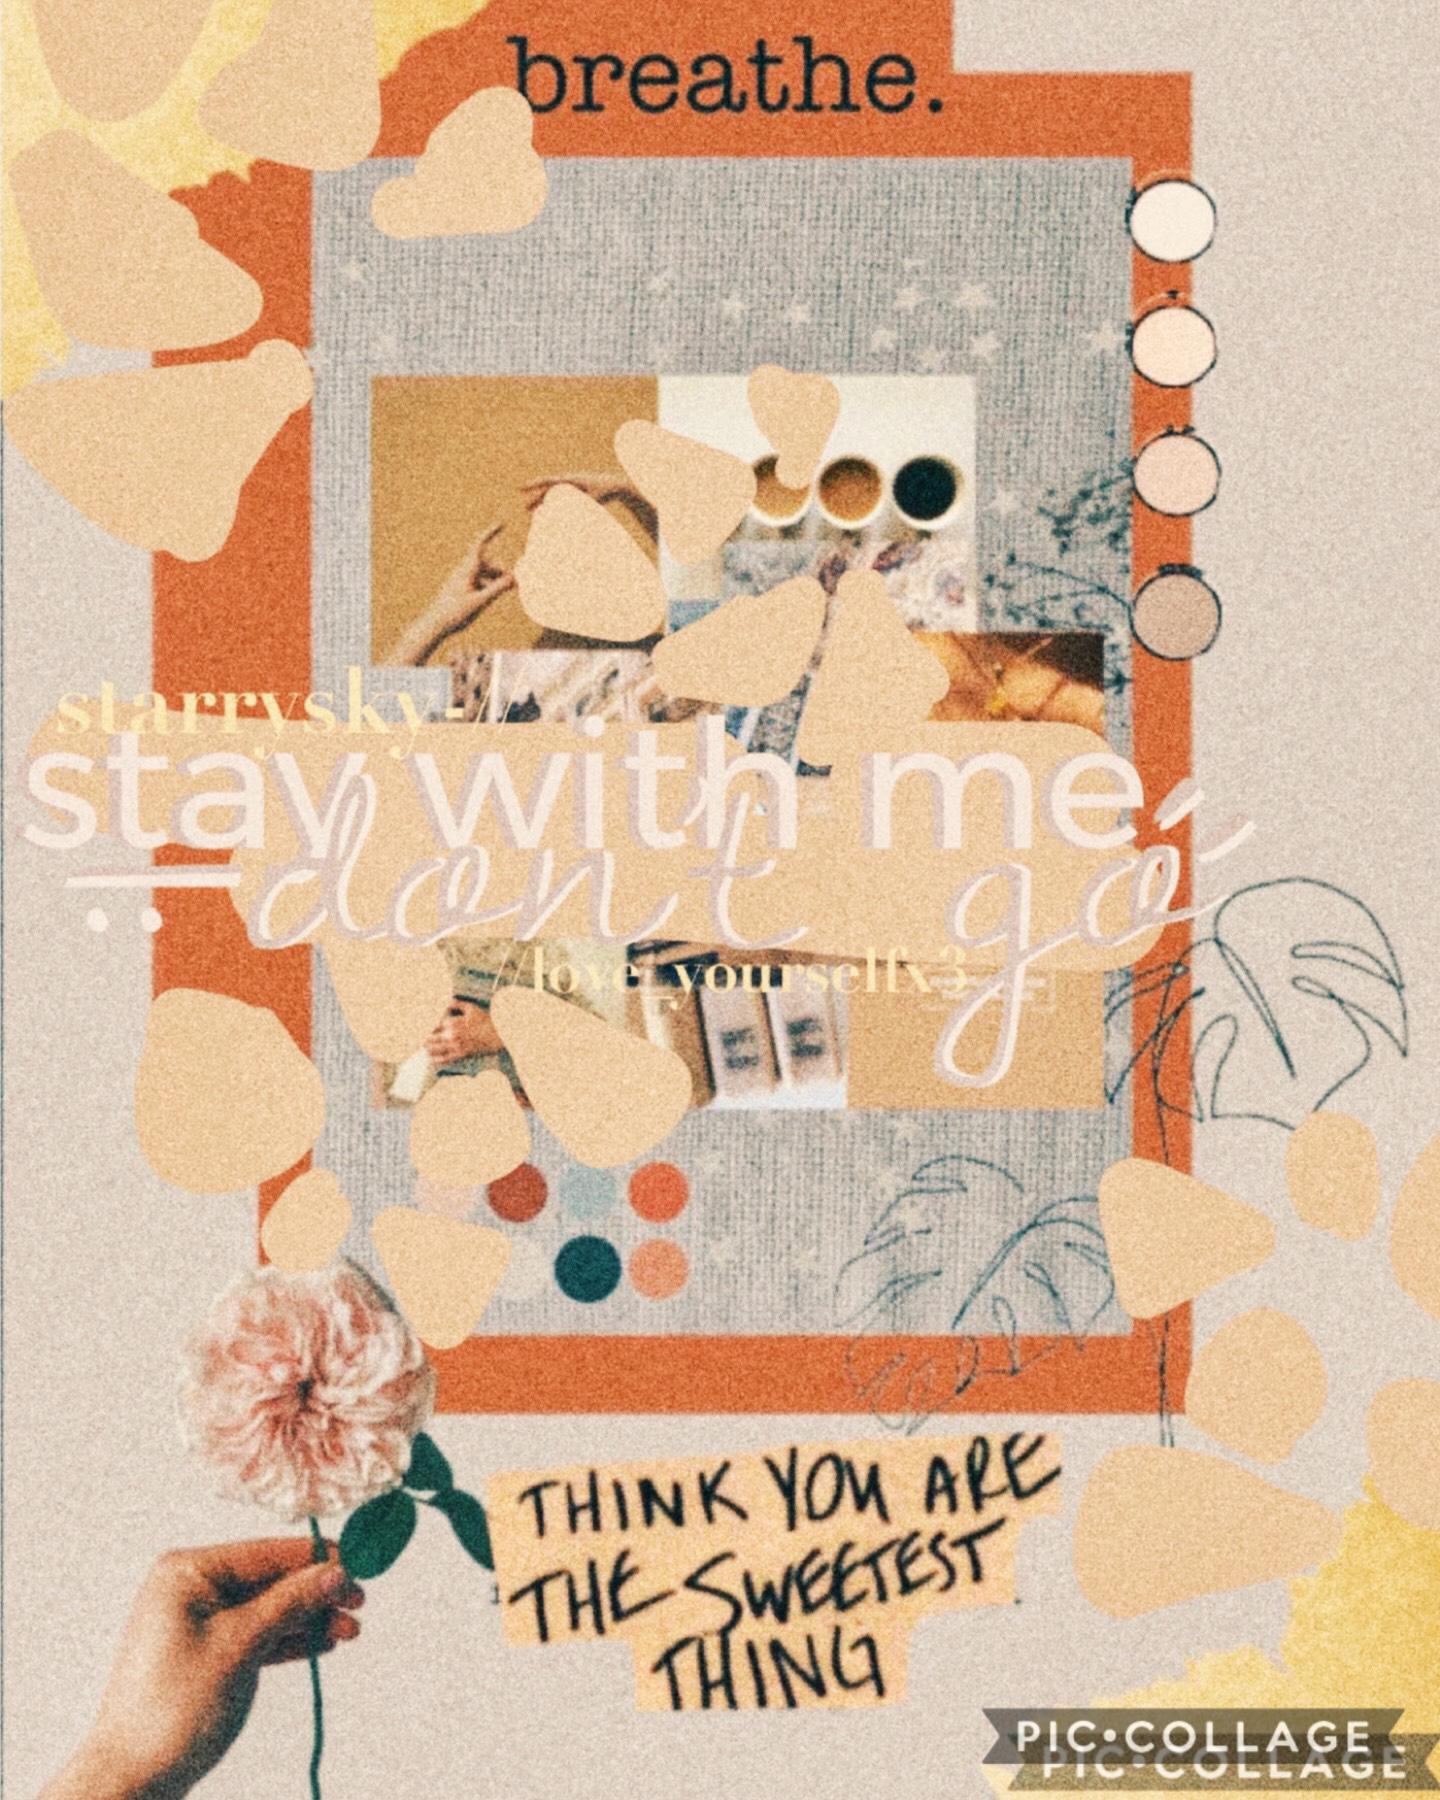 Collab with starrysky-!! Tap for moree

She did the background and I did the text, a little hard to read but this looks quite pretty overall I think :DD